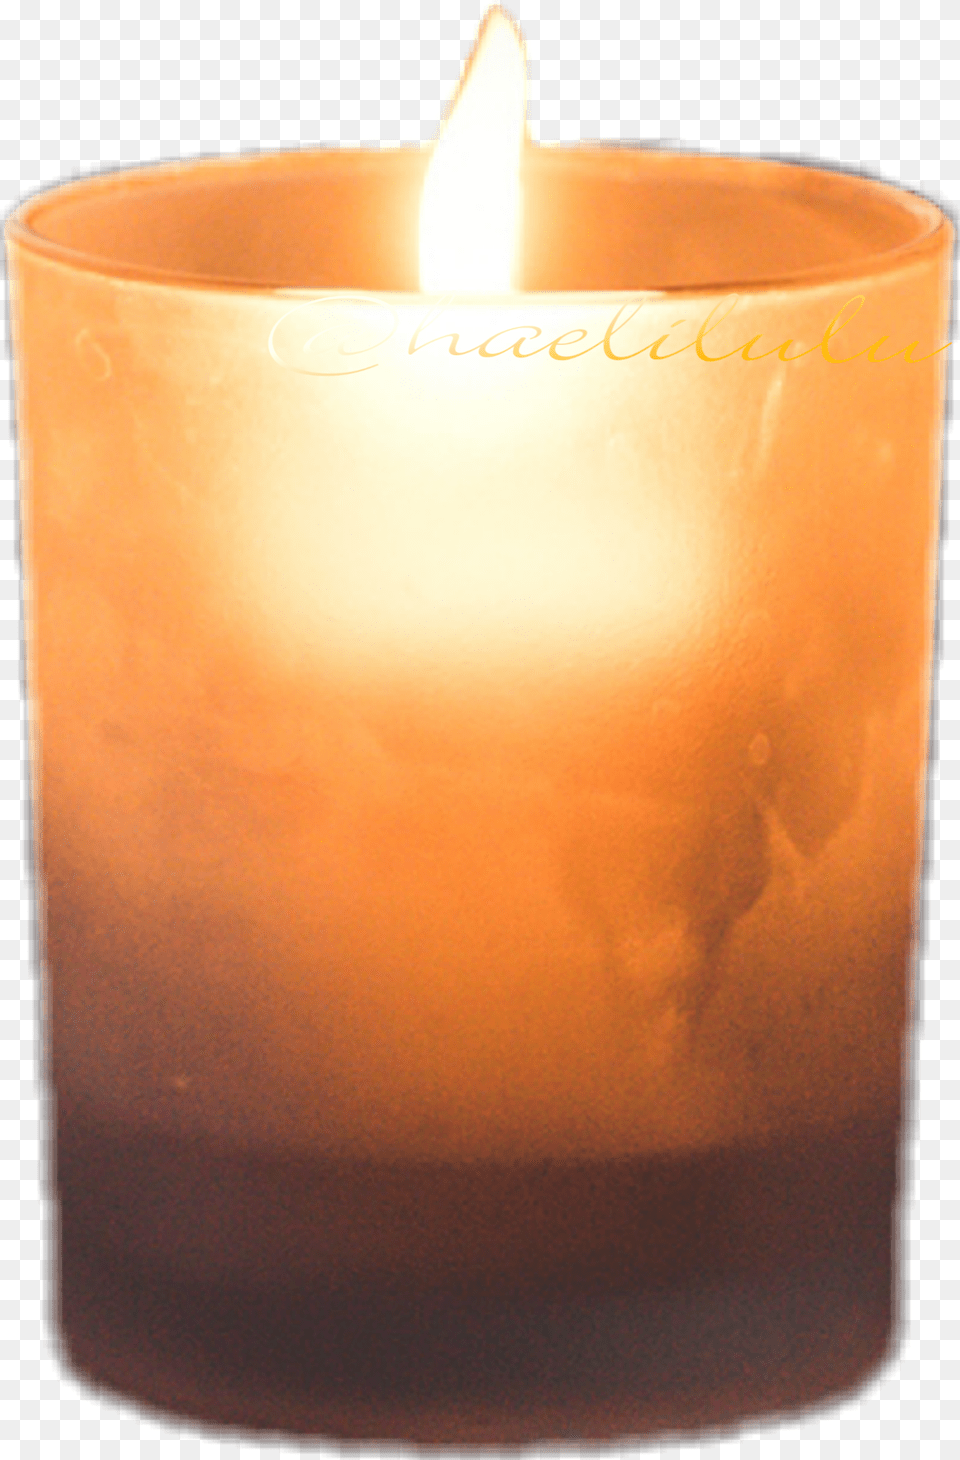 Colormehappy Light Candle Flame Candleflame Flicker Candle, Cup Png